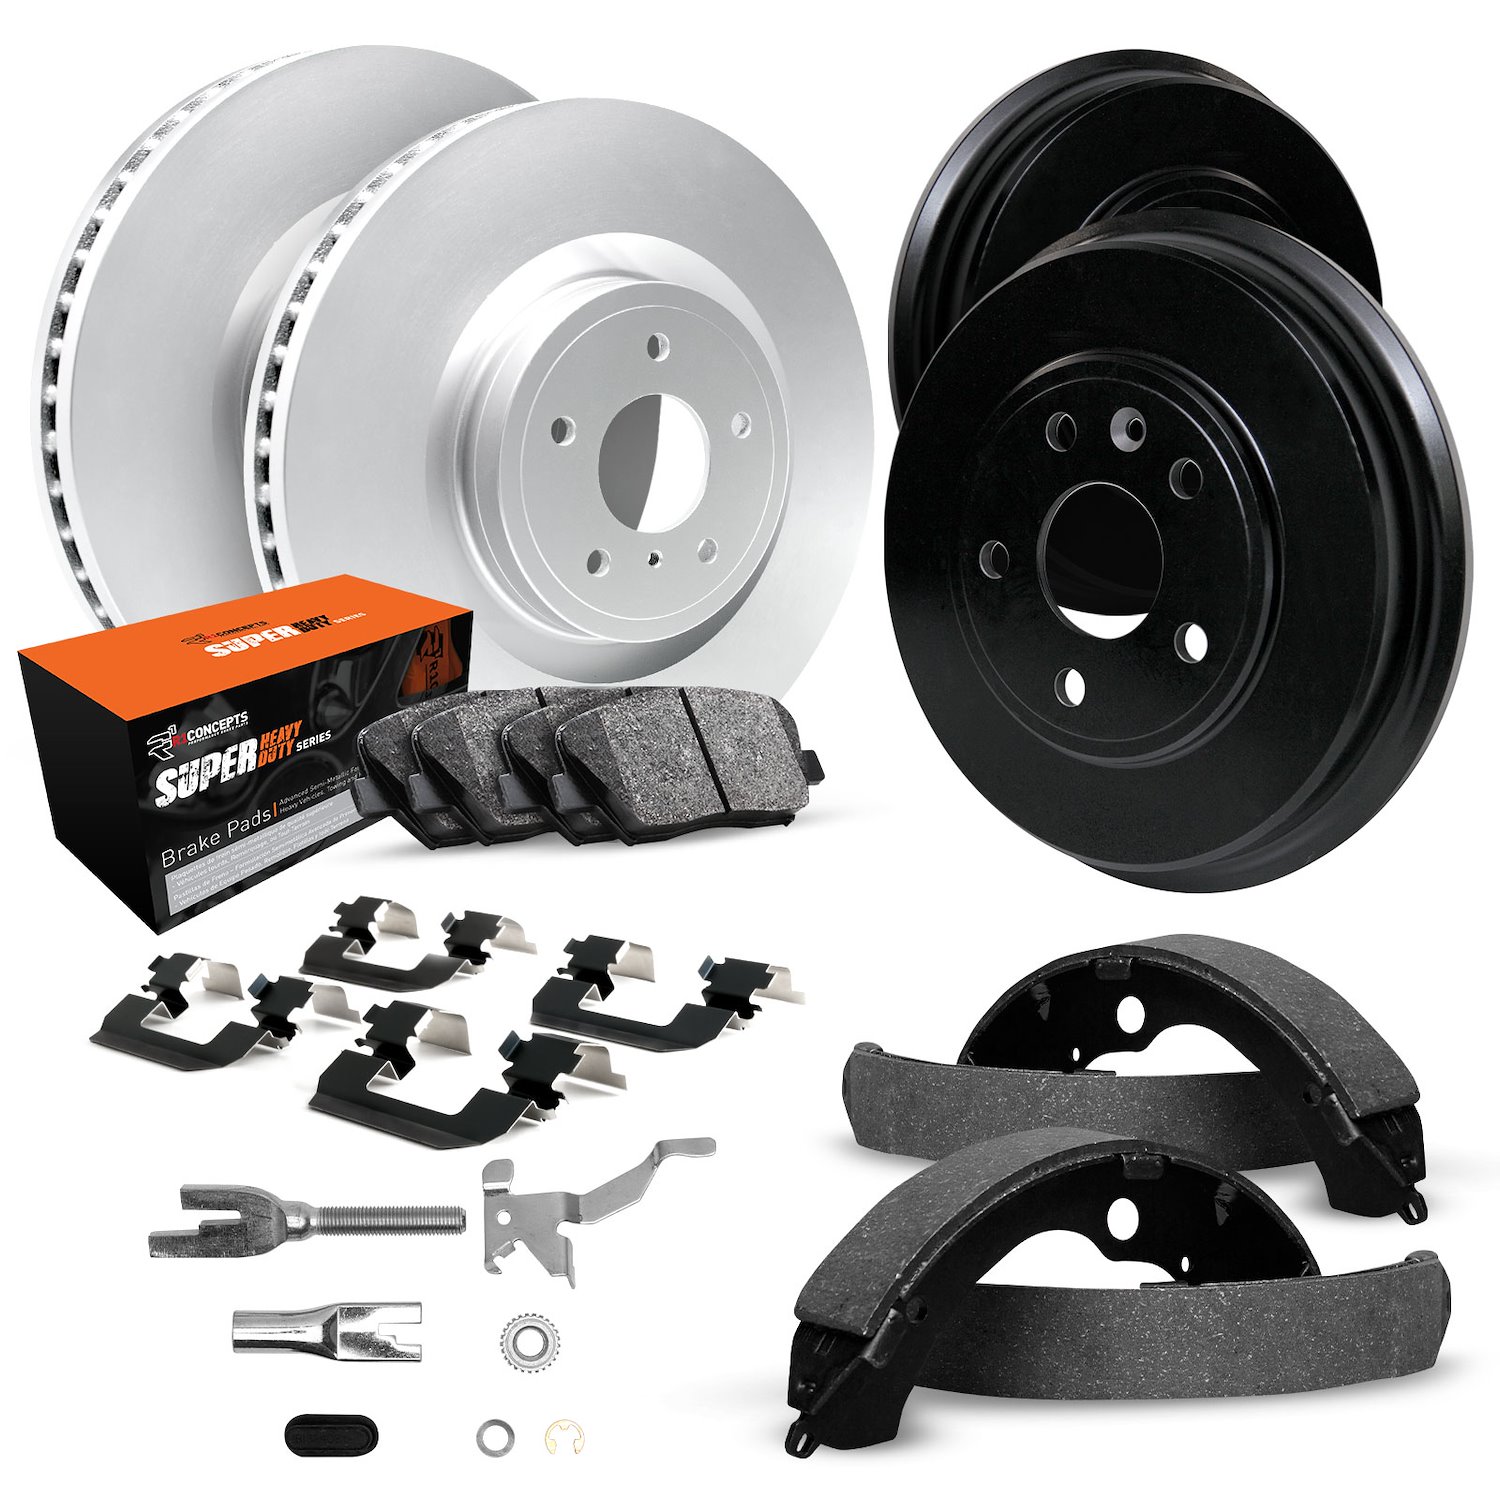 GEO-Carbon Brake Rotor & Drum Set w/Super-Duty Pads, Shoes, Hardware/Adjusters, 1976-1977 GM, Position: Front & Rear